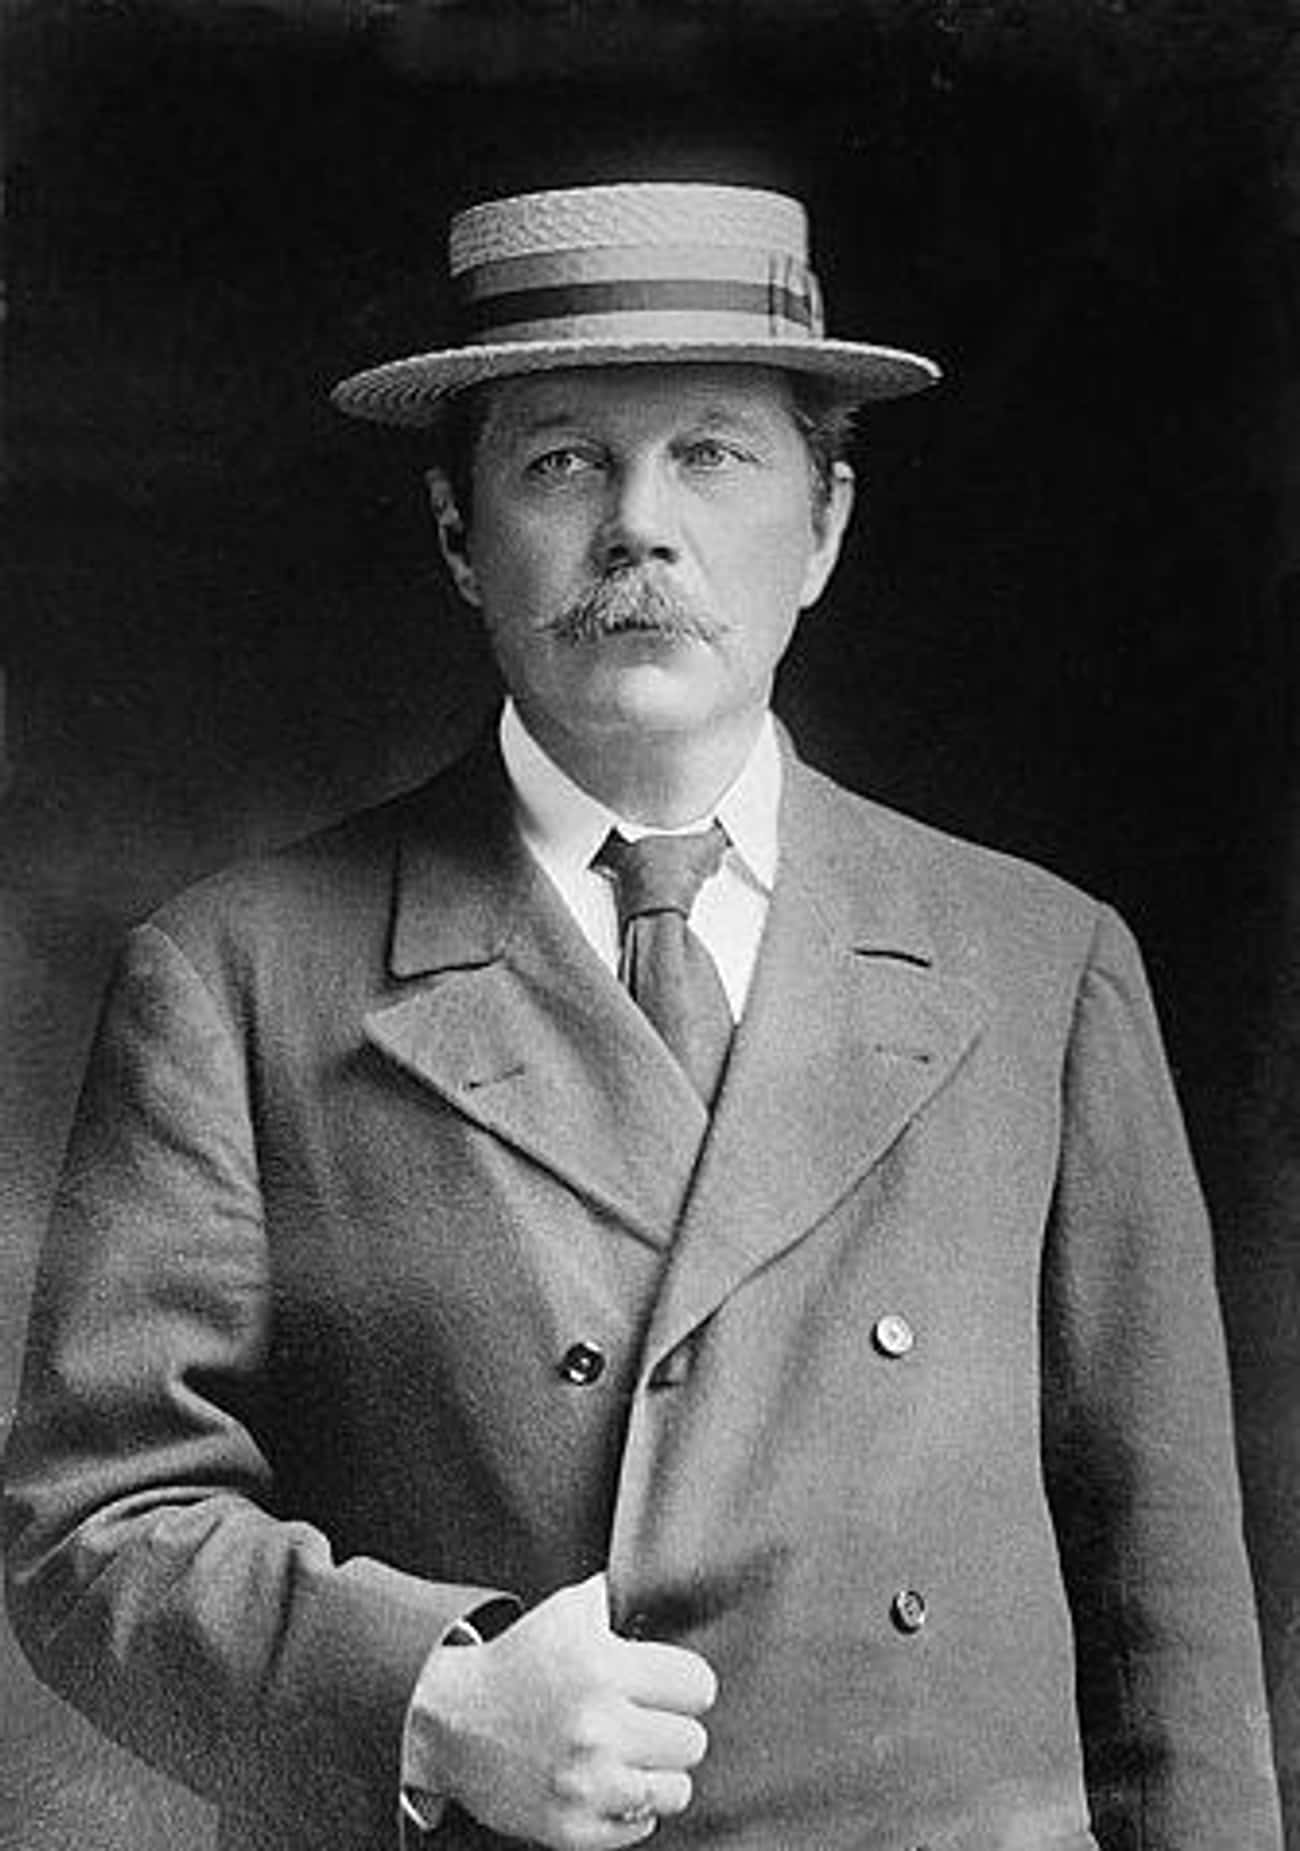 Green Was Obsessed With Conan Doyle